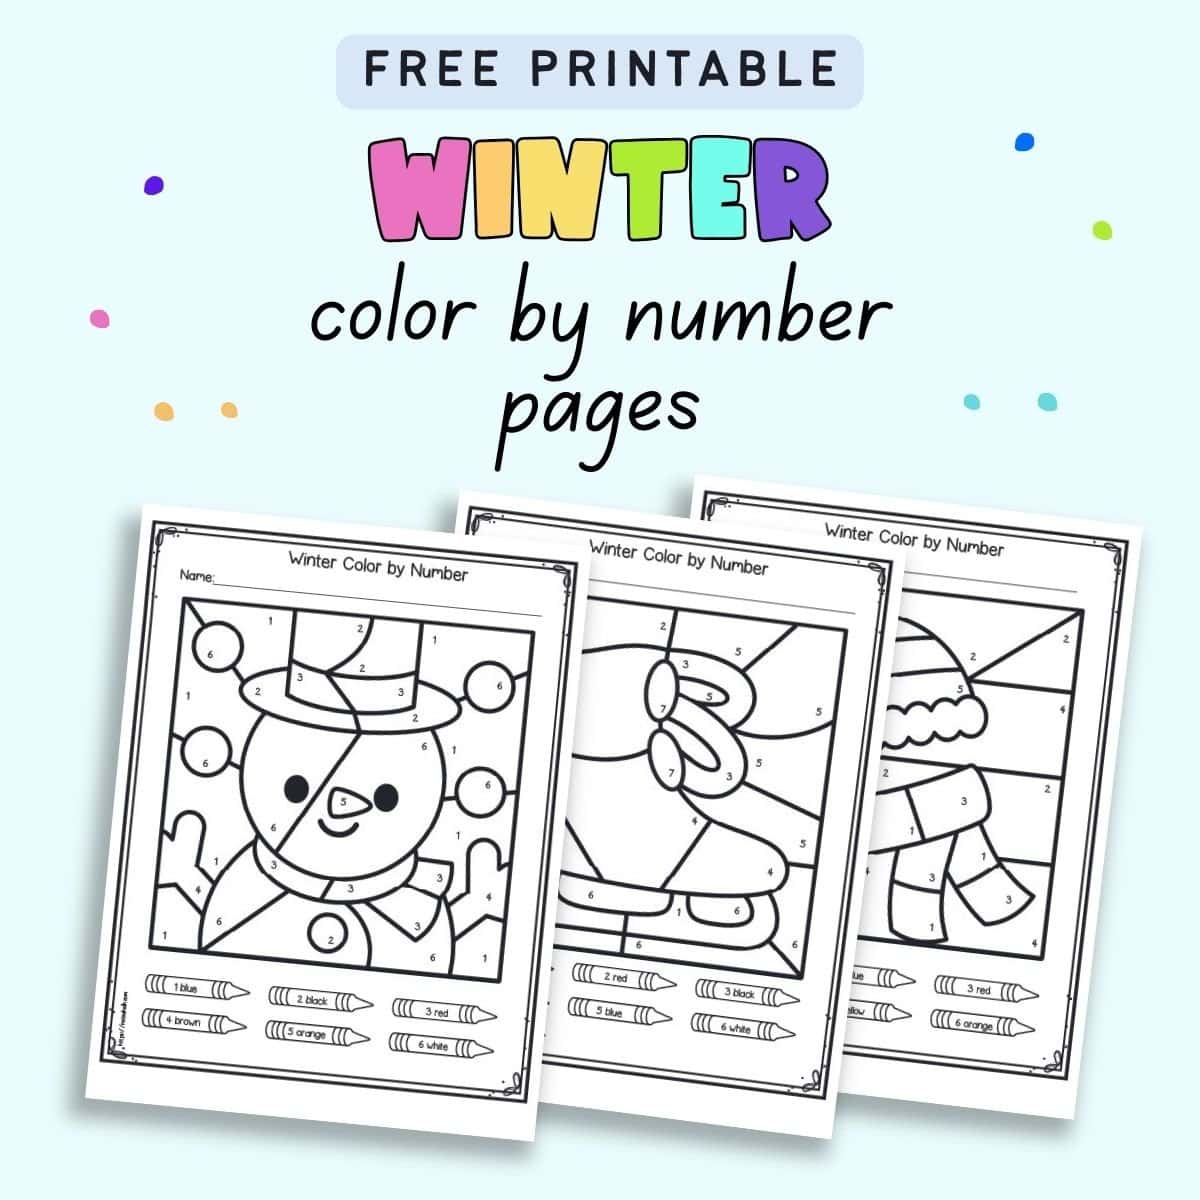 Text "free printable winter color by number pages" with a preview of three pages of color by number worksheets